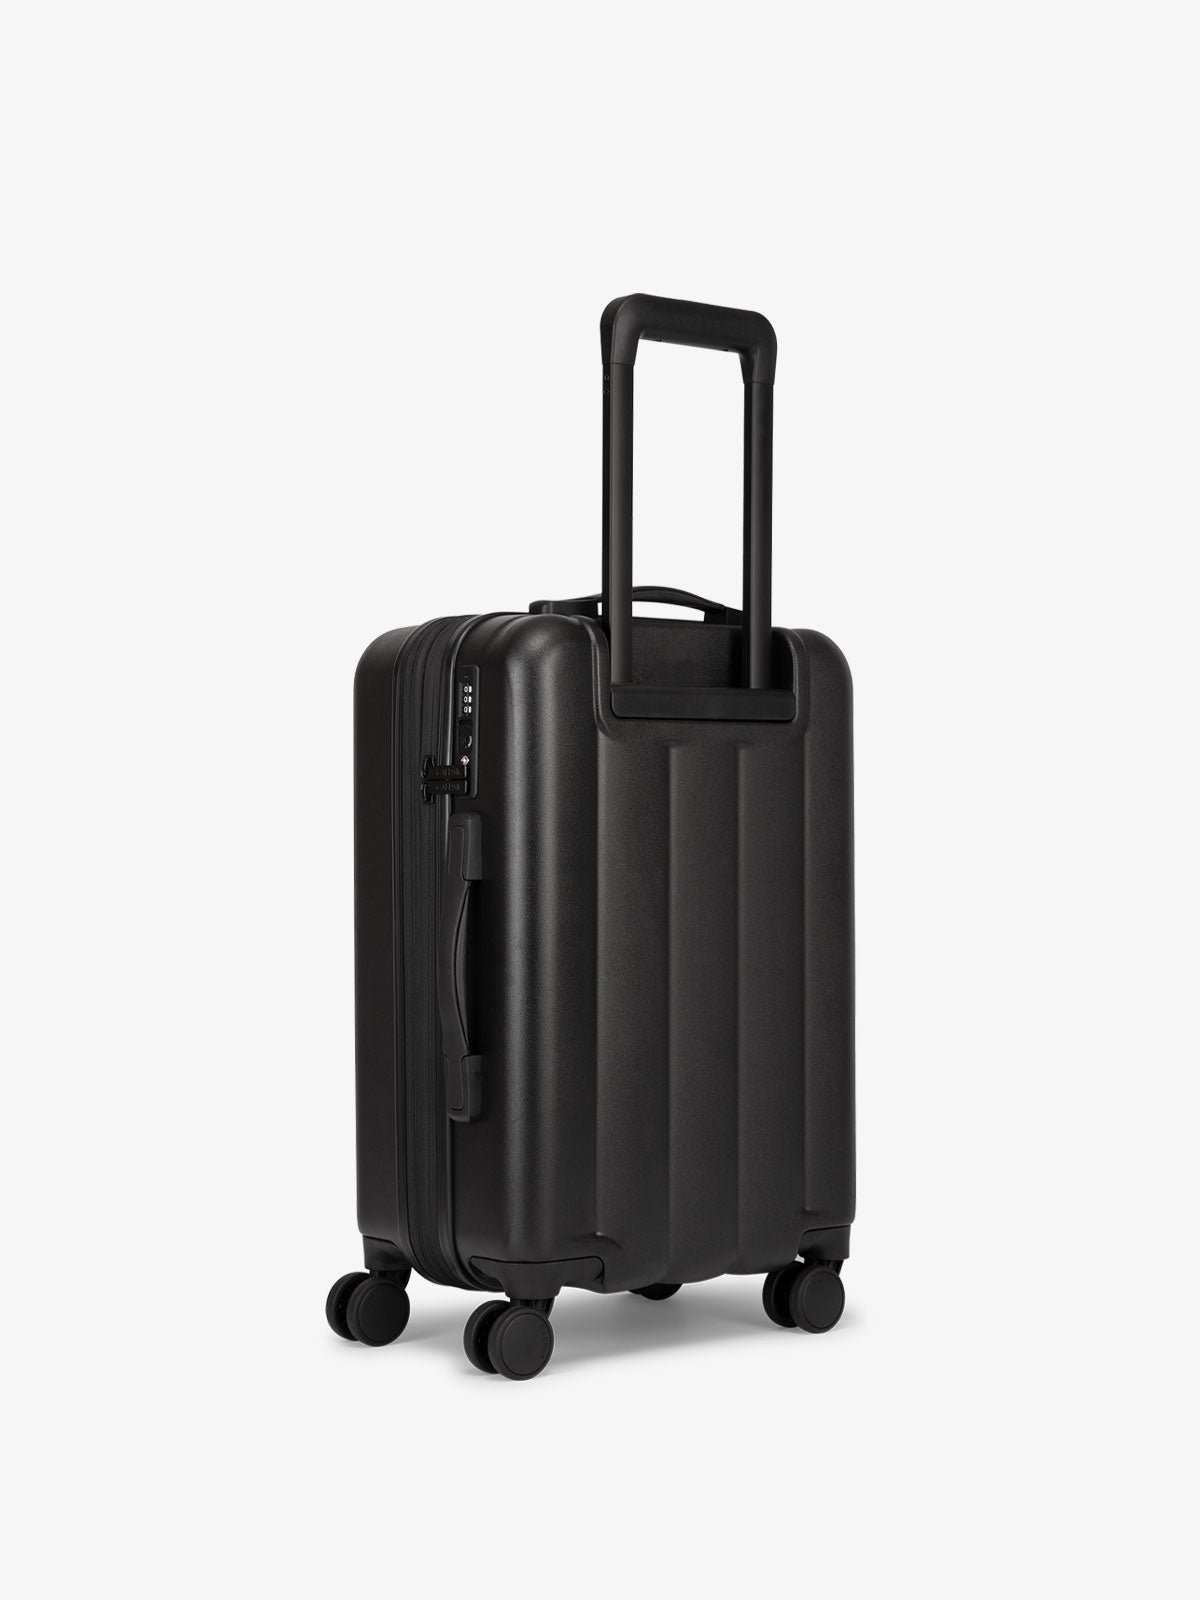 Black CALPAK carry-on luggage featuring dual spinner wheels and bottom grab handle